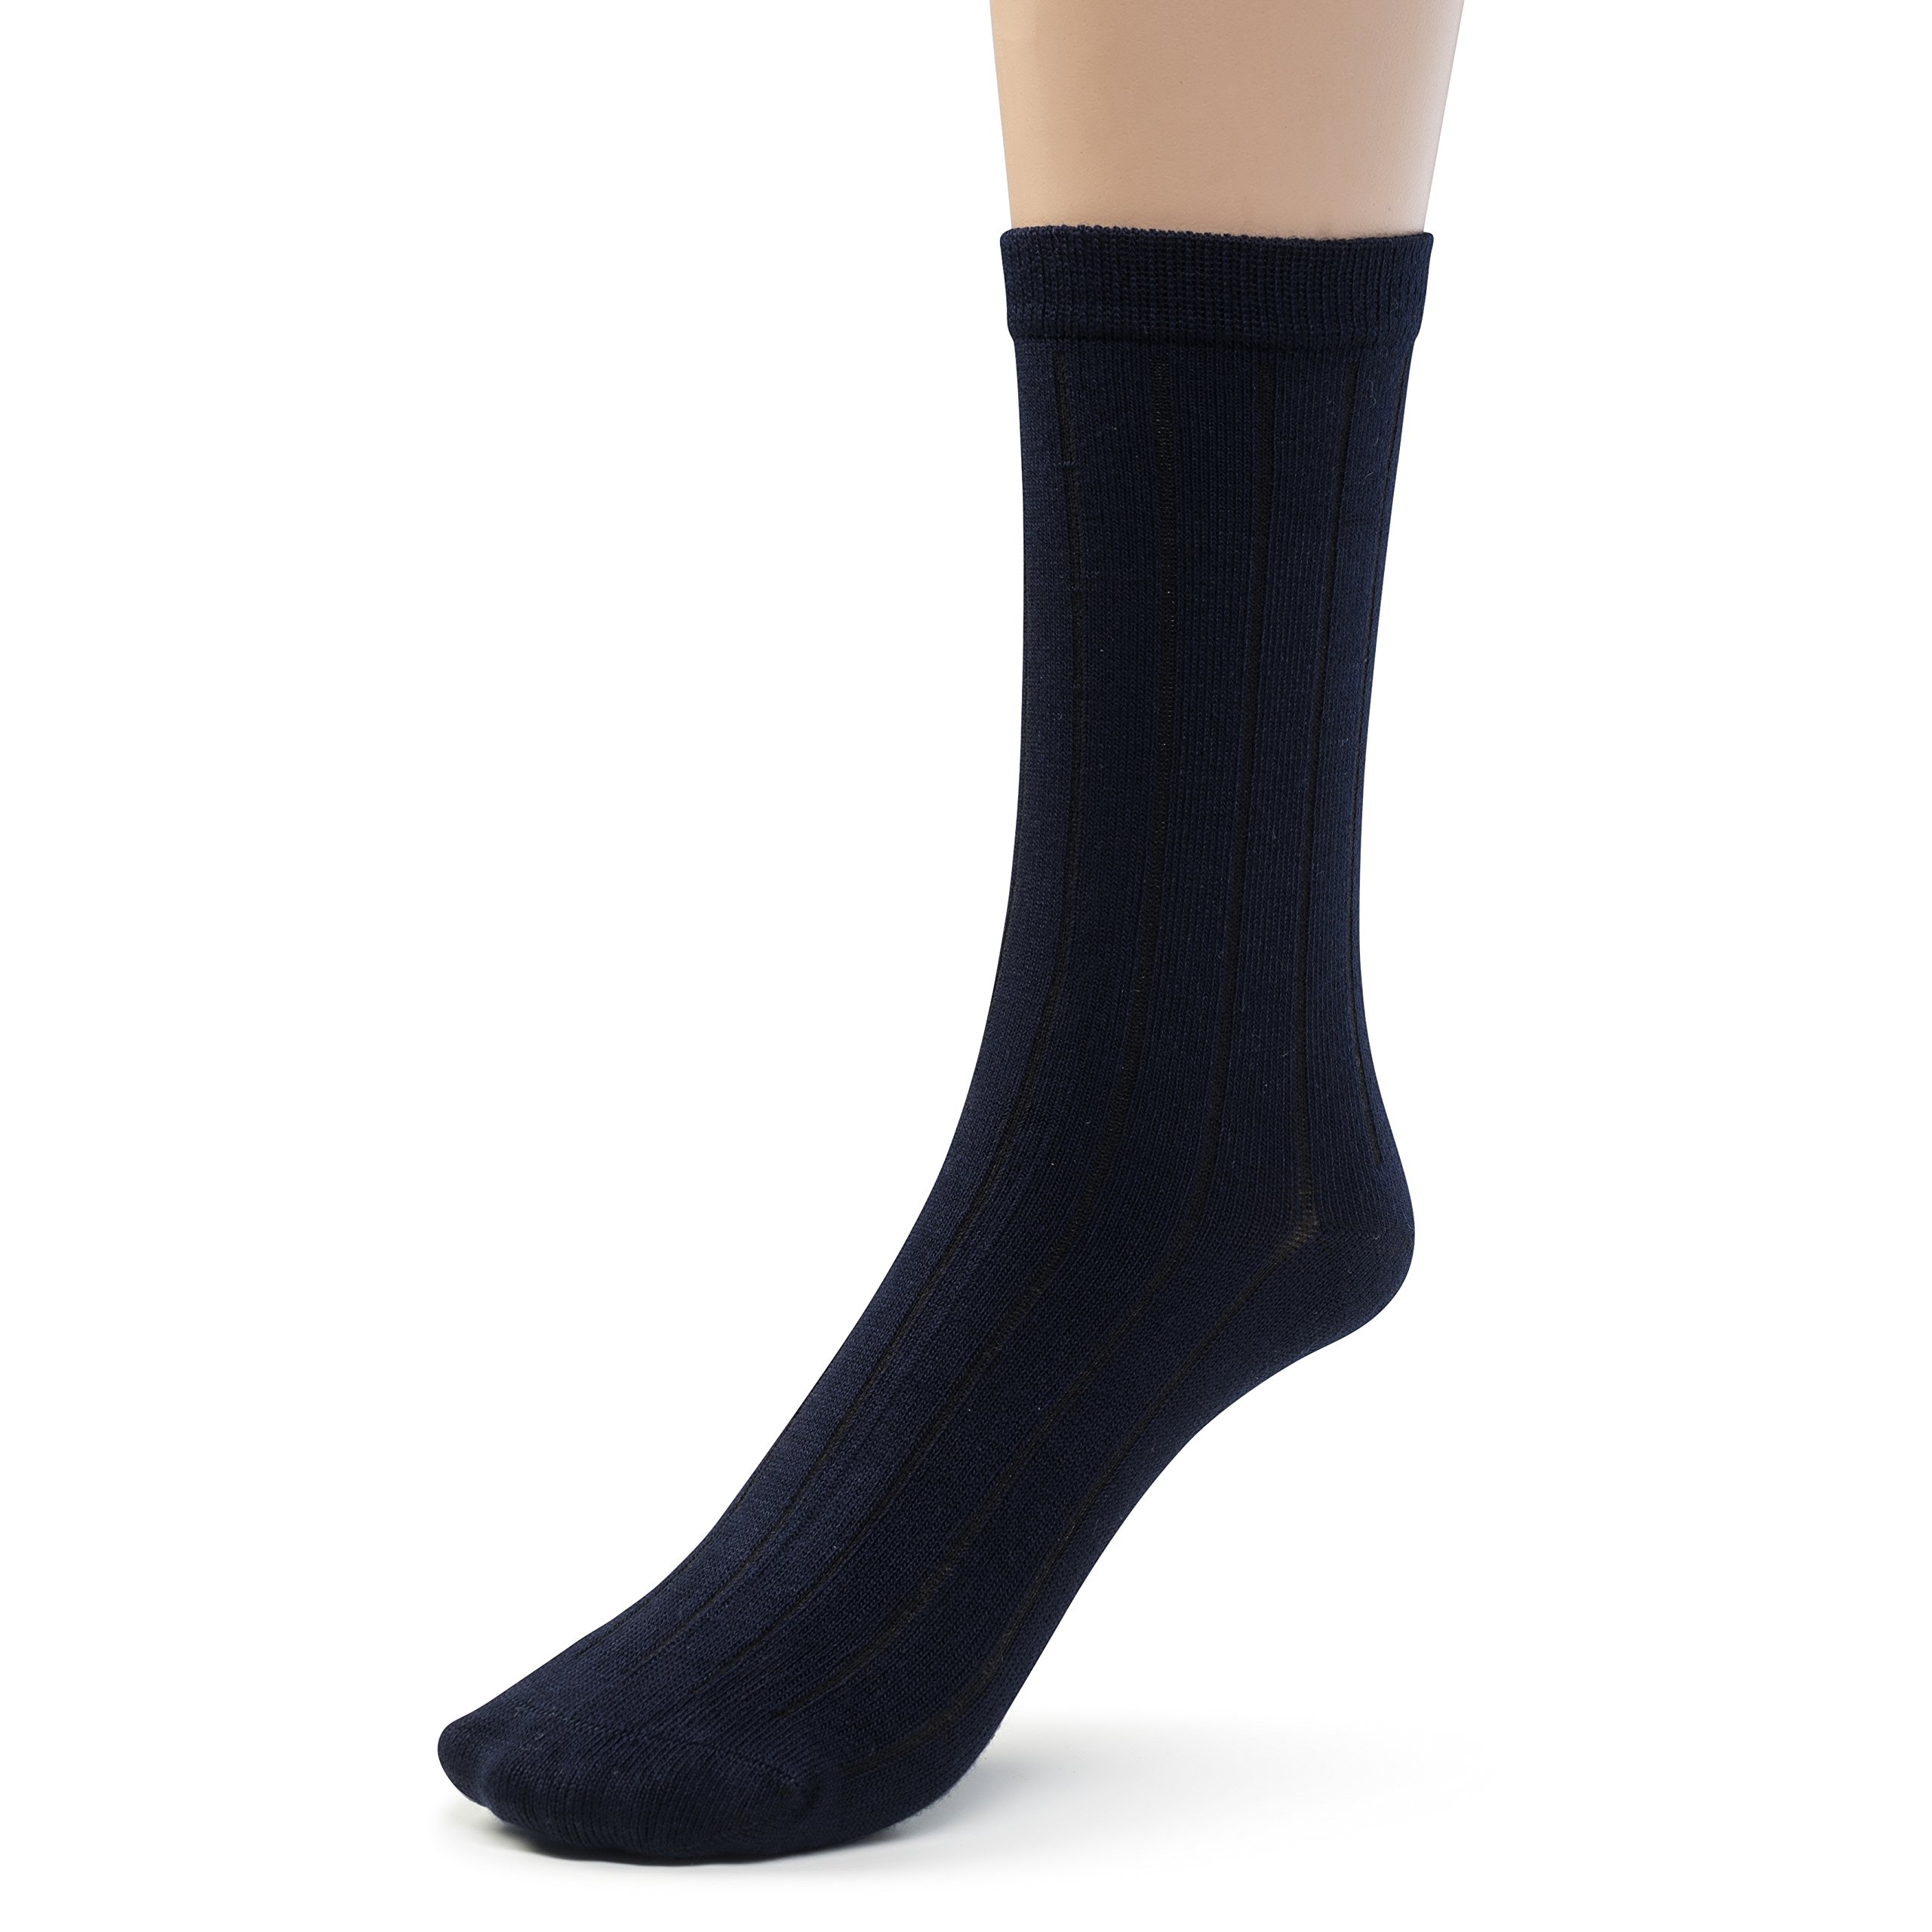 Buy Silky Toes Bamboo Seamless Crew Socks for Boys Girls, 3 or 6